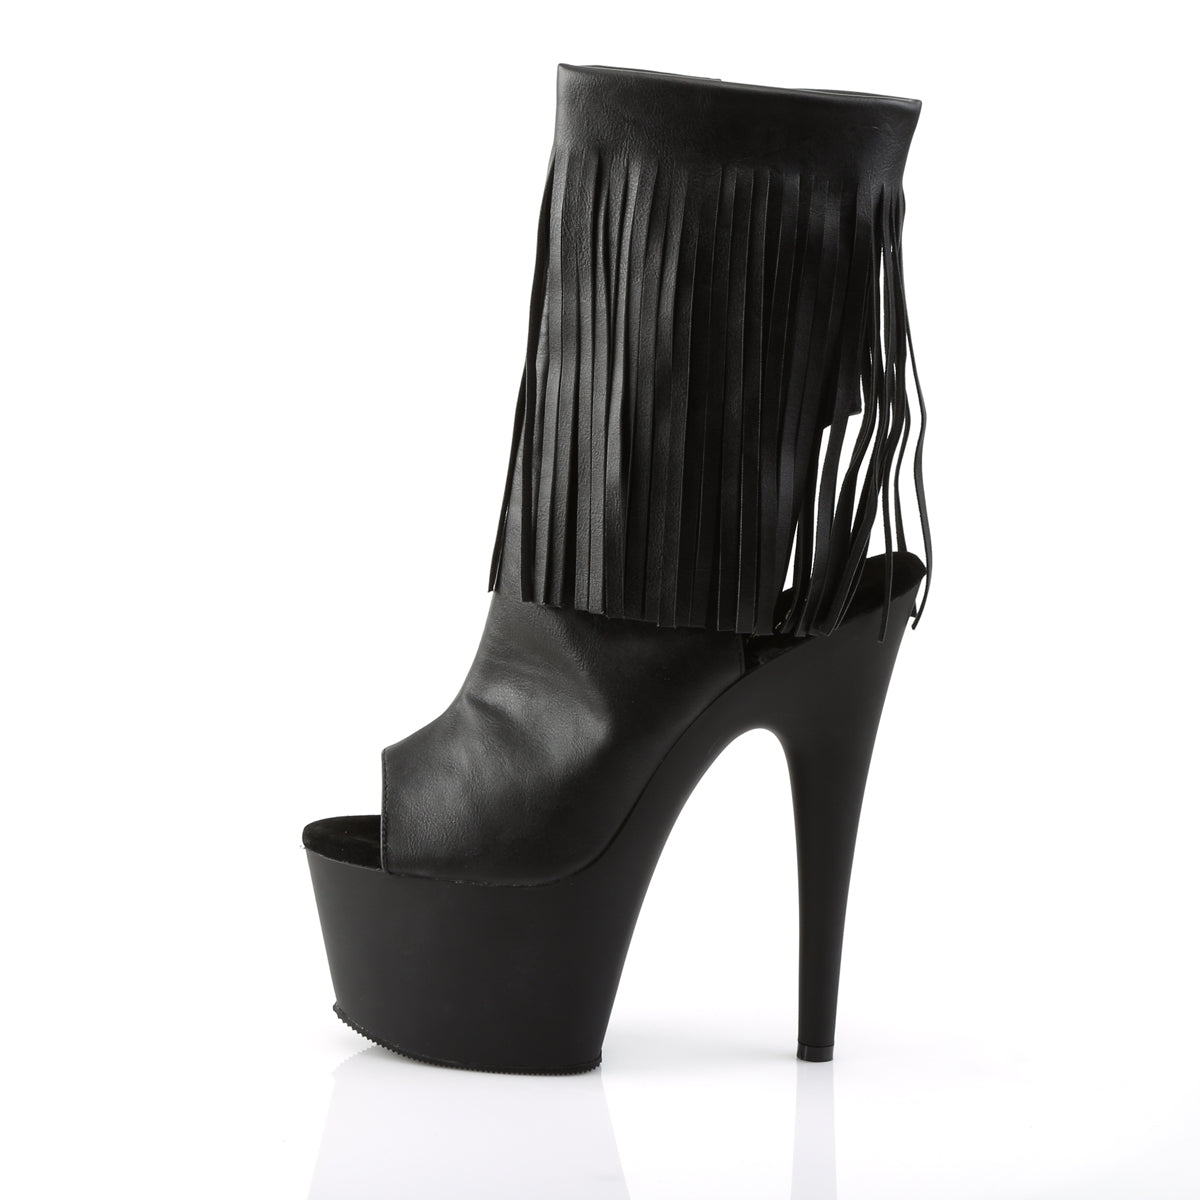 ADORE-1019 Pleaser 7" Heel Black Exotic Dancing Ankle Boots-Pleaser- Sexy Shoes Pole Dance Heels